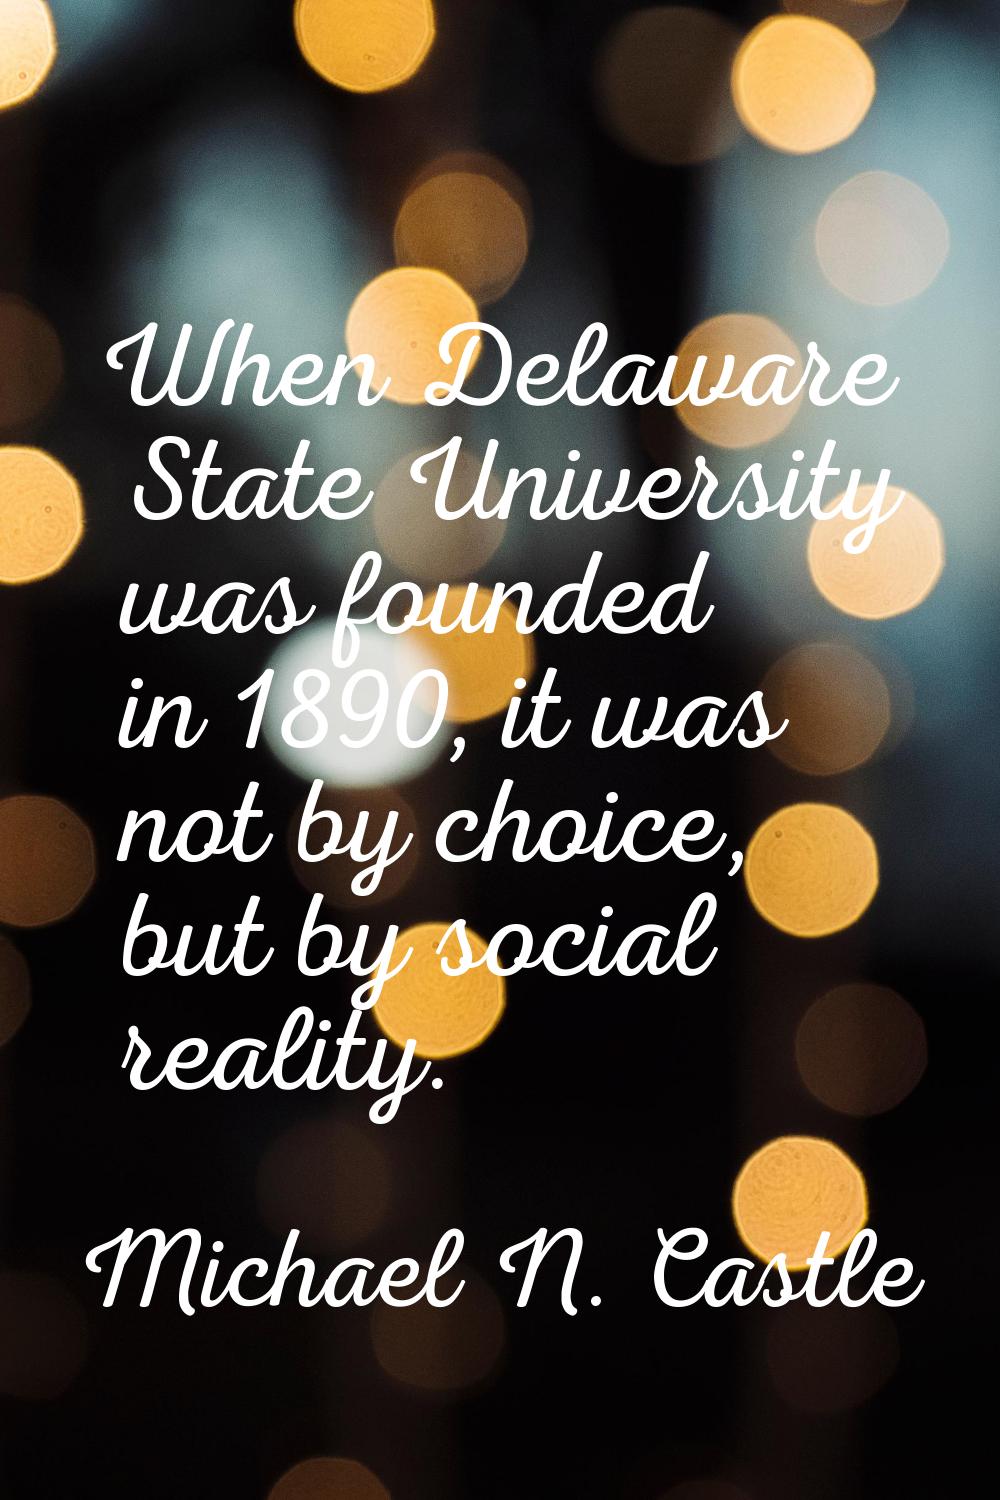 When Delaware State University was founded in 1890, it was not by choice, but by social reality.